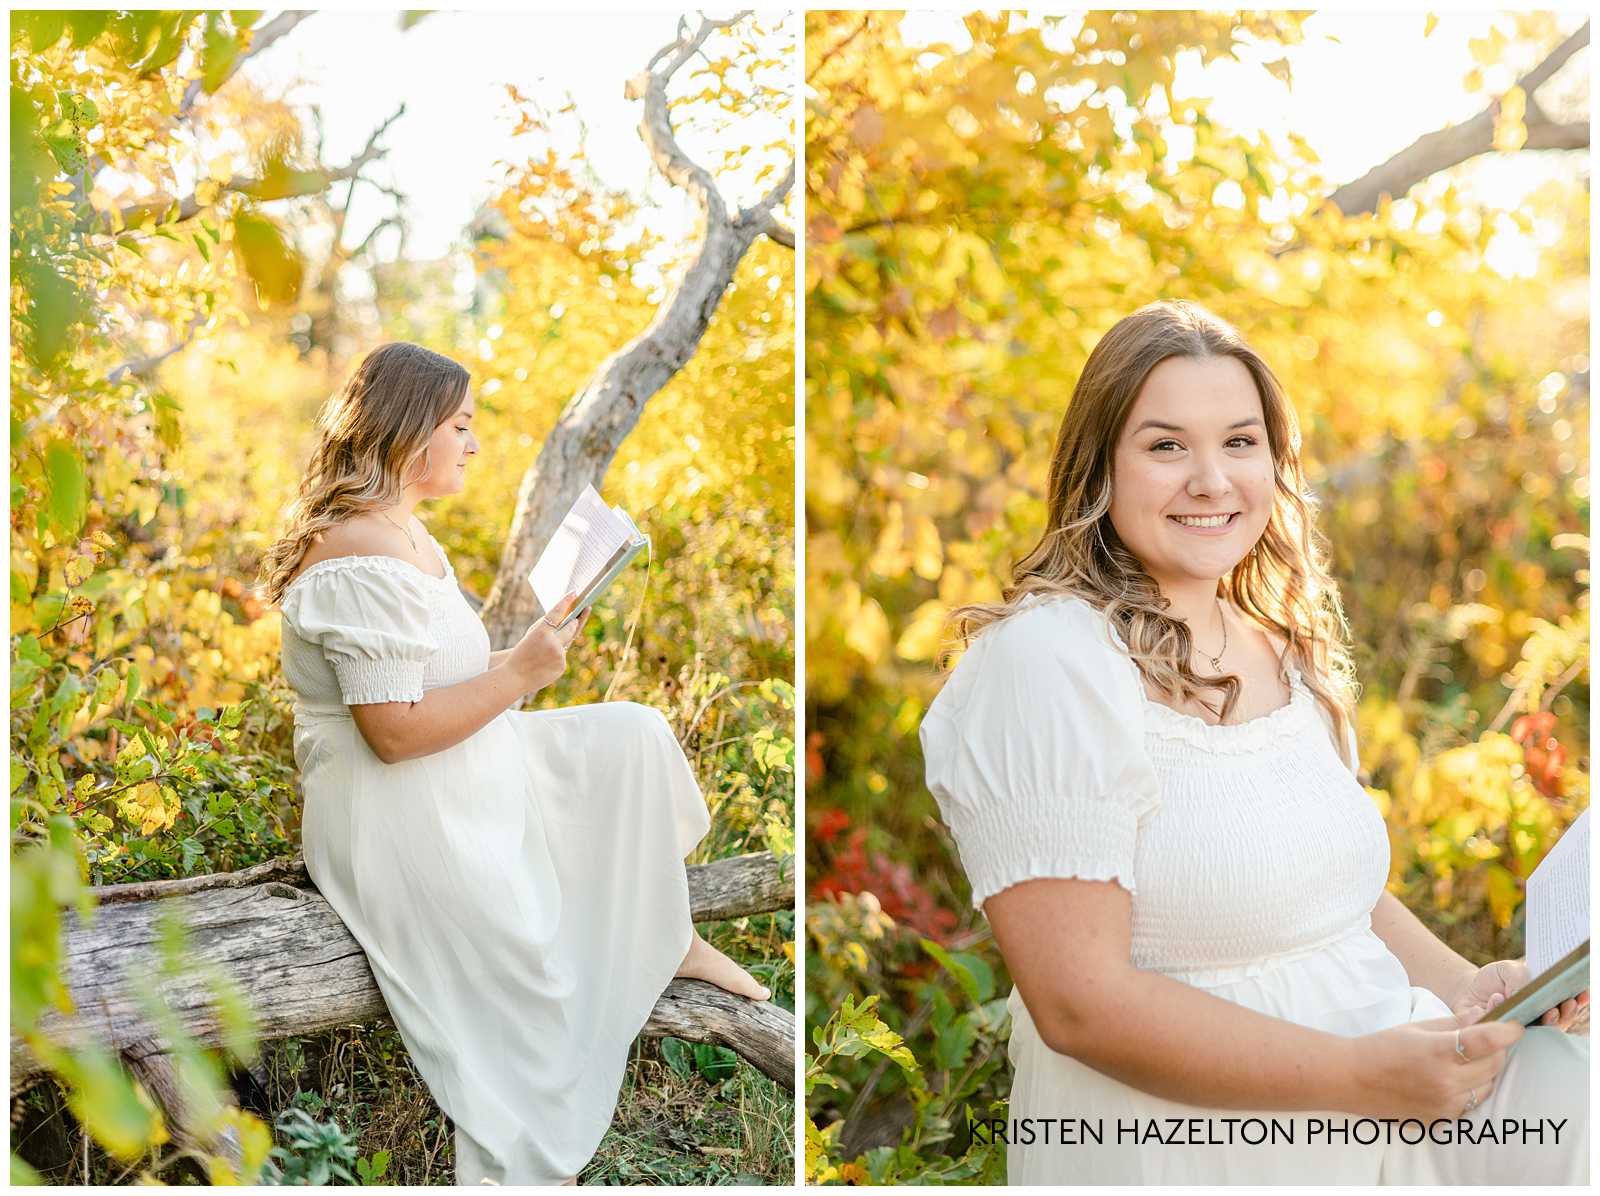 Books aesthetic photoshoot; a high school senior girl in a white dress reading a book while sitting in a tree